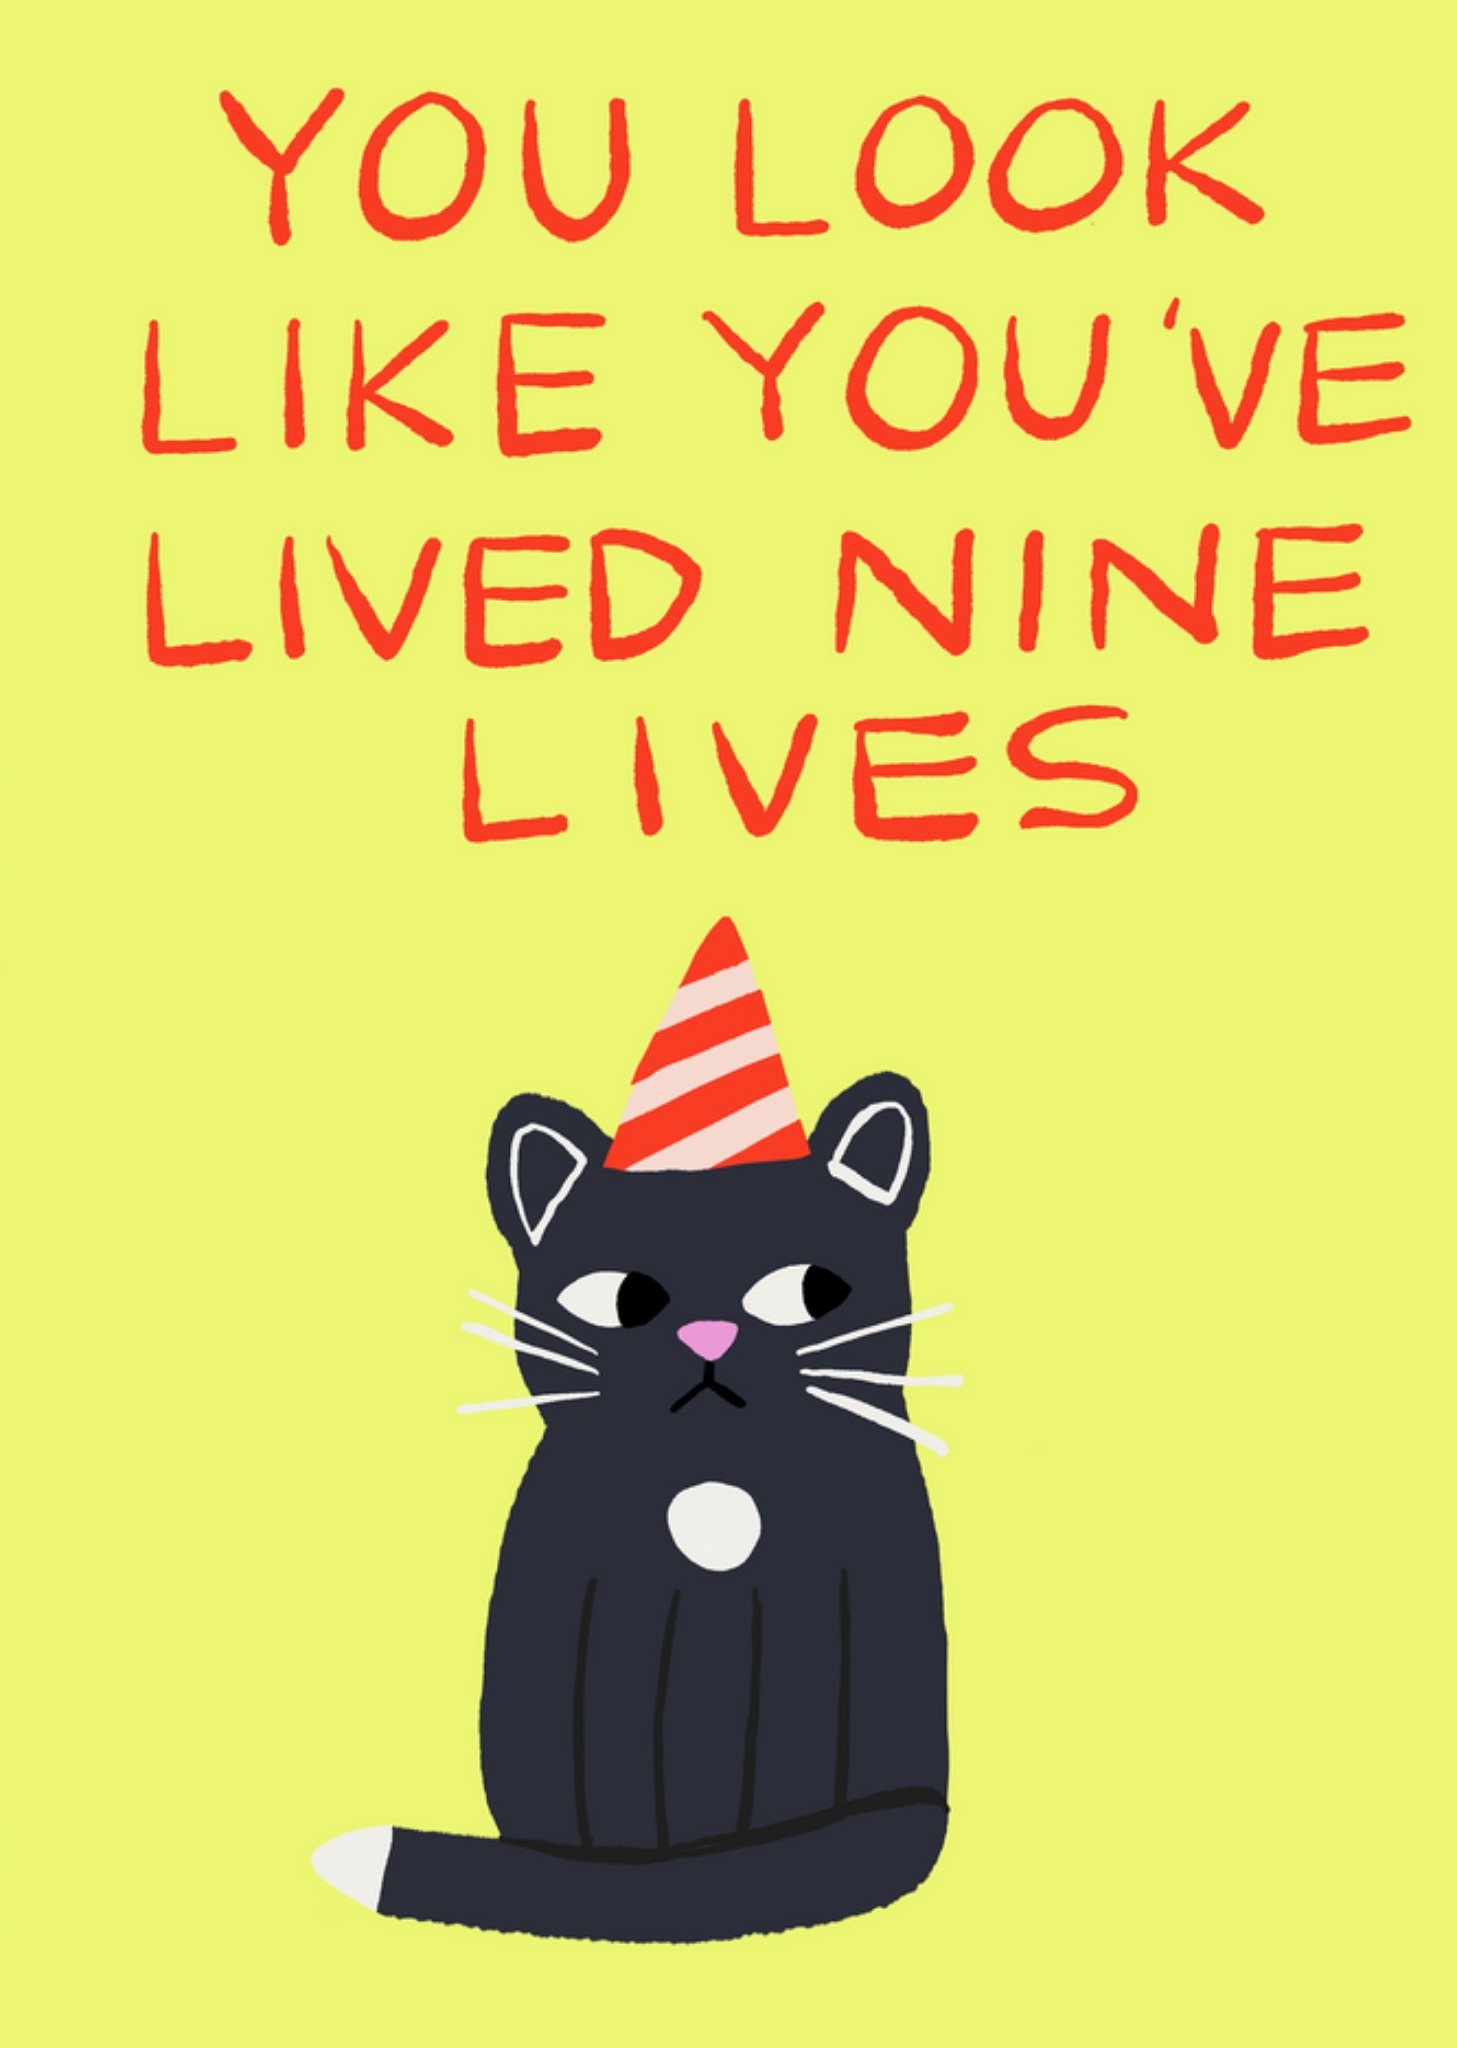 Jolly Awesome You Look Like You've Lived Nine Lives Birthday Card, Large